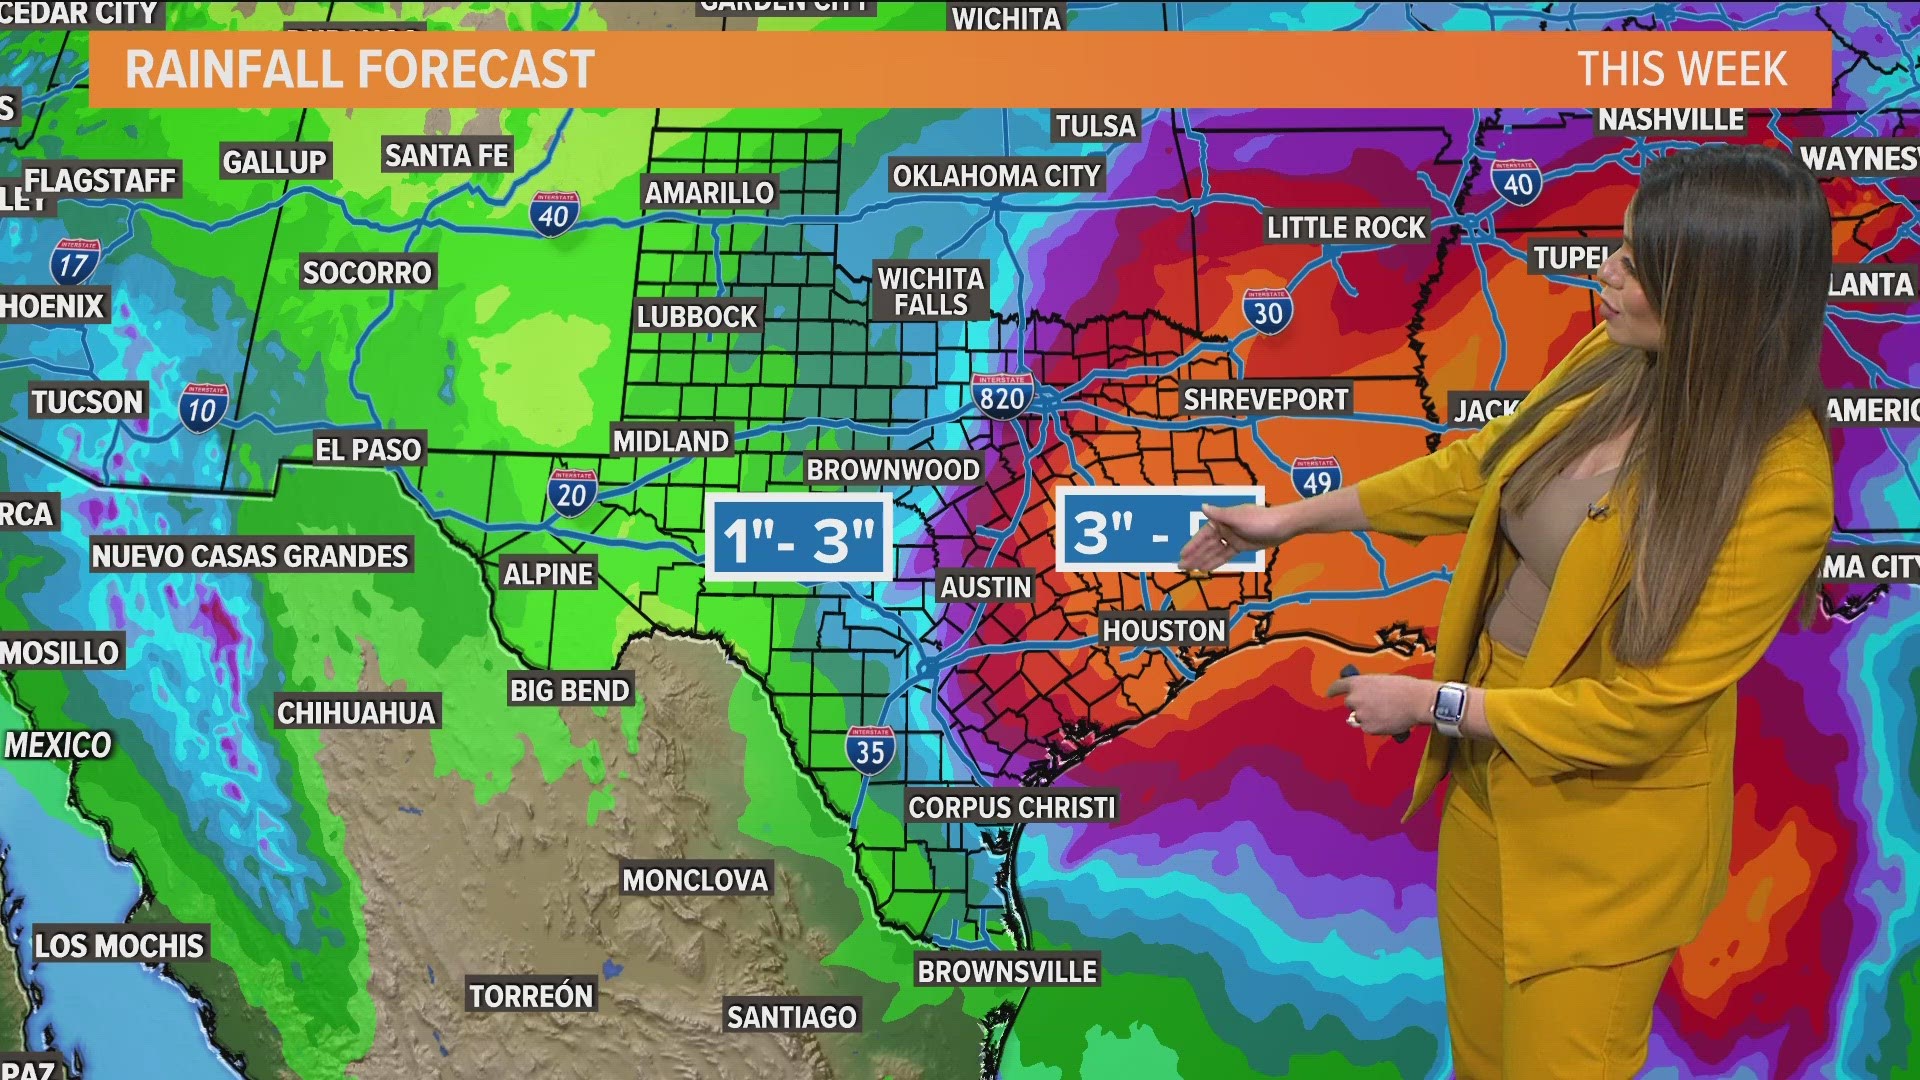 A weather system is bringing rain across the Lone Star State this week, including some freezing drizzle in North Texas.